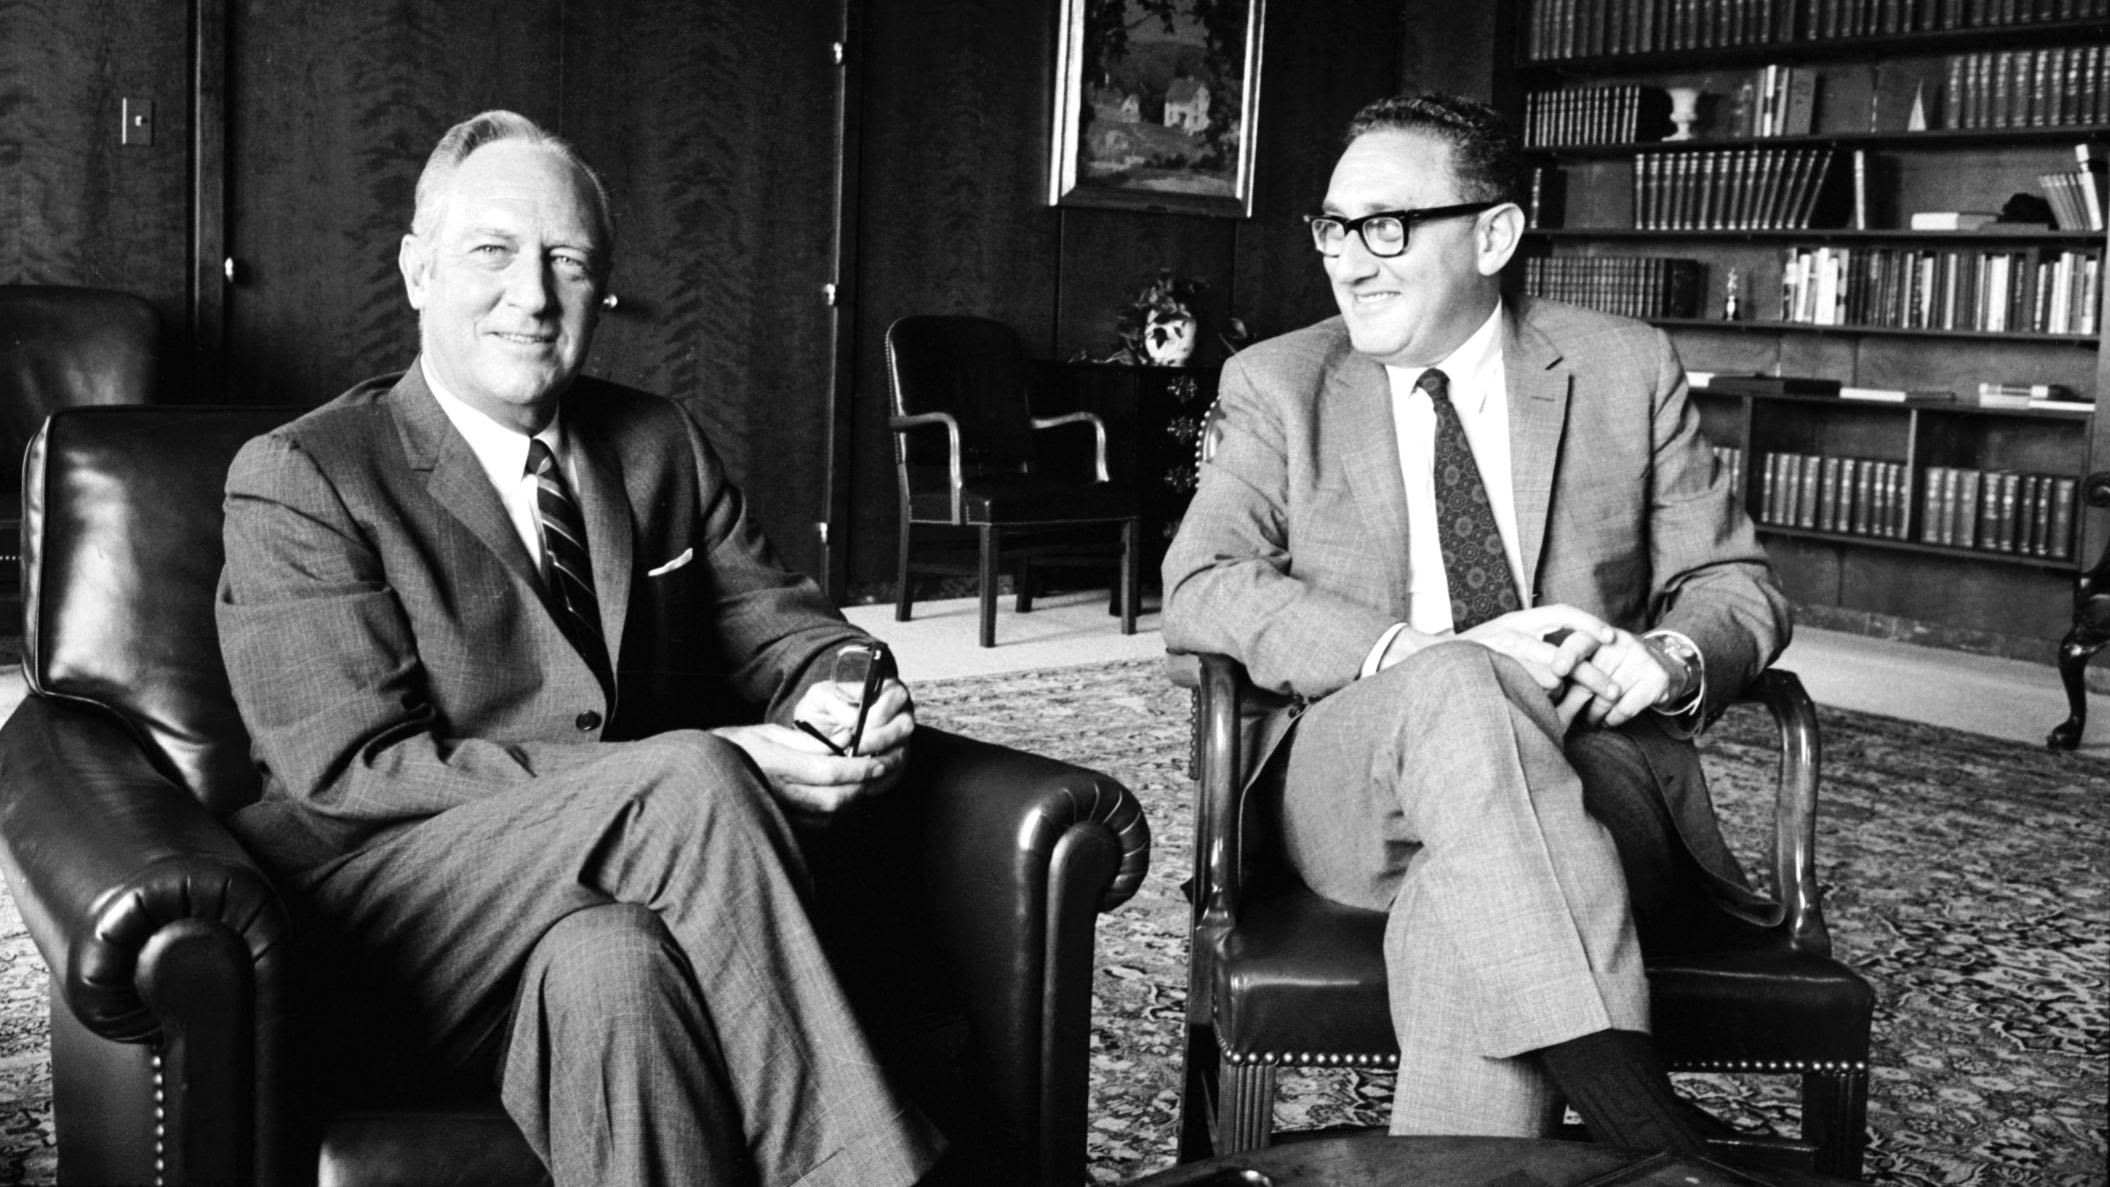 Kissinger, as US national security adviser, sits with US Secretary of State William P. Rogers in 1969. Earlier in the 1960s, Kissinger was a consultant for the National Security Council, the US Arms Control and Disarmament Agency and the State Department.